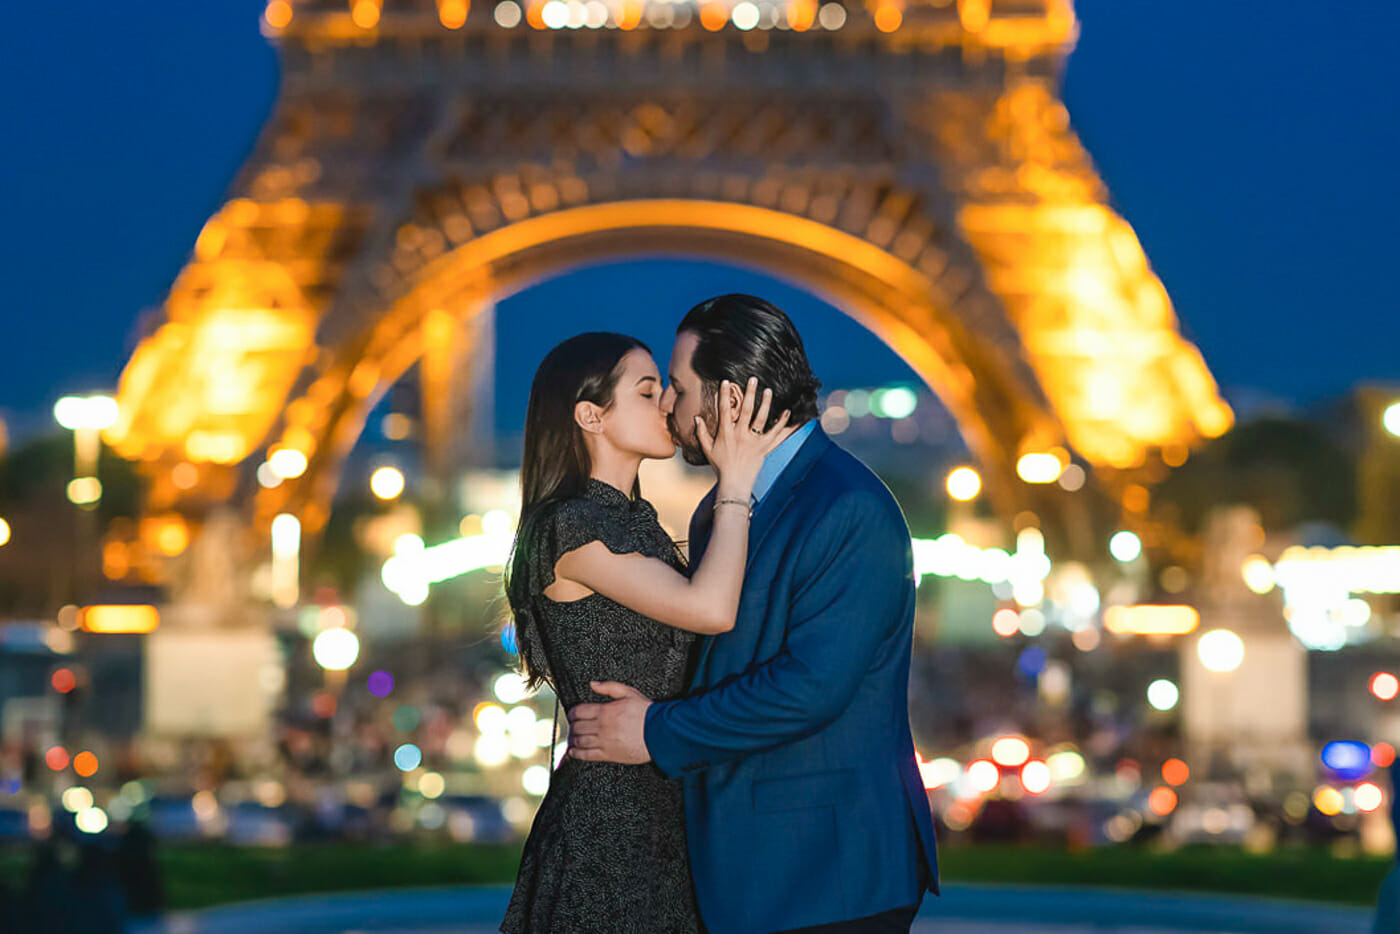 Intimate couple photos Eiffel Tower at night during Blue Hour